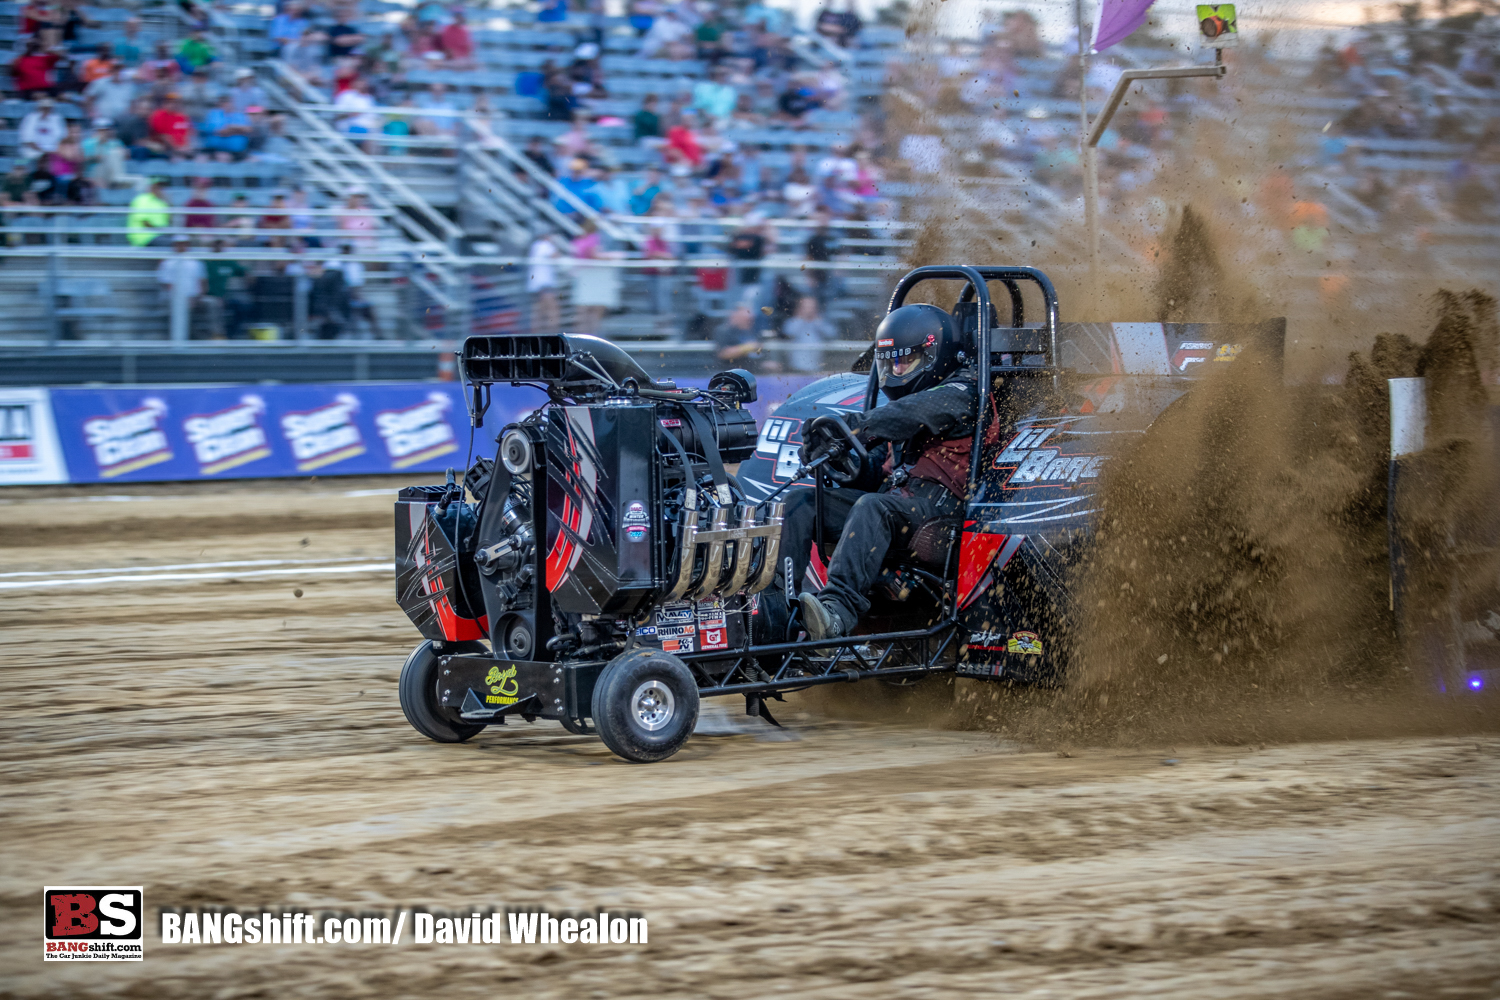 Lucas Oil Pro Pulling League Photos From GALOT!